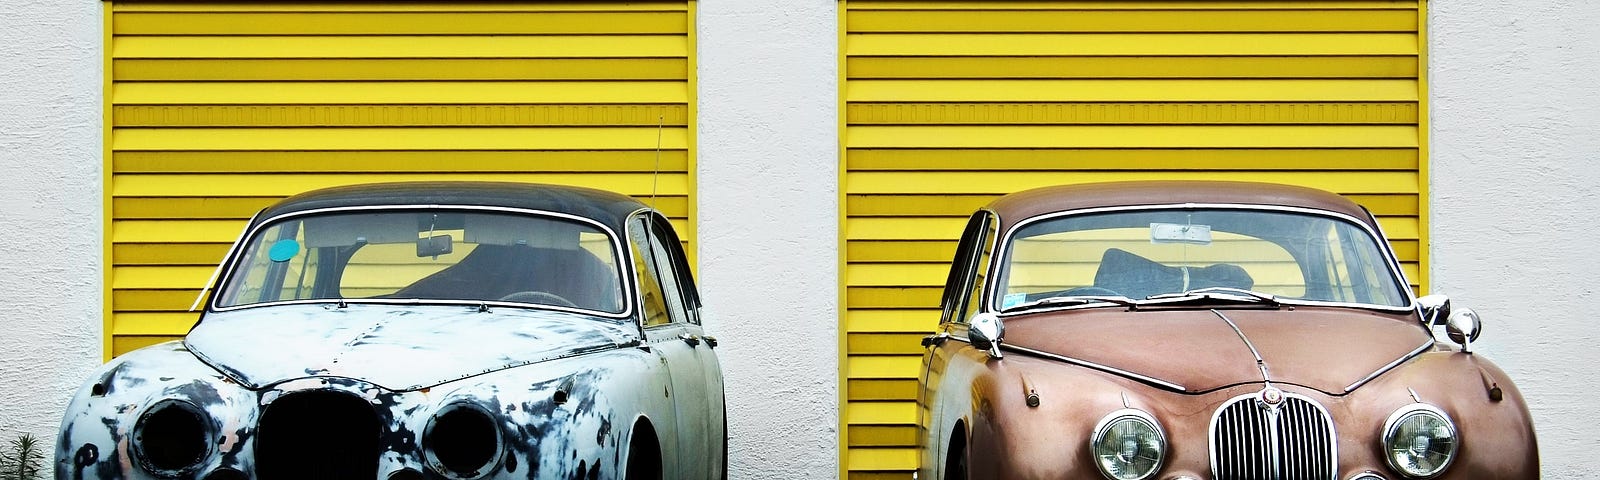 Two retro cars in front of yellow garage